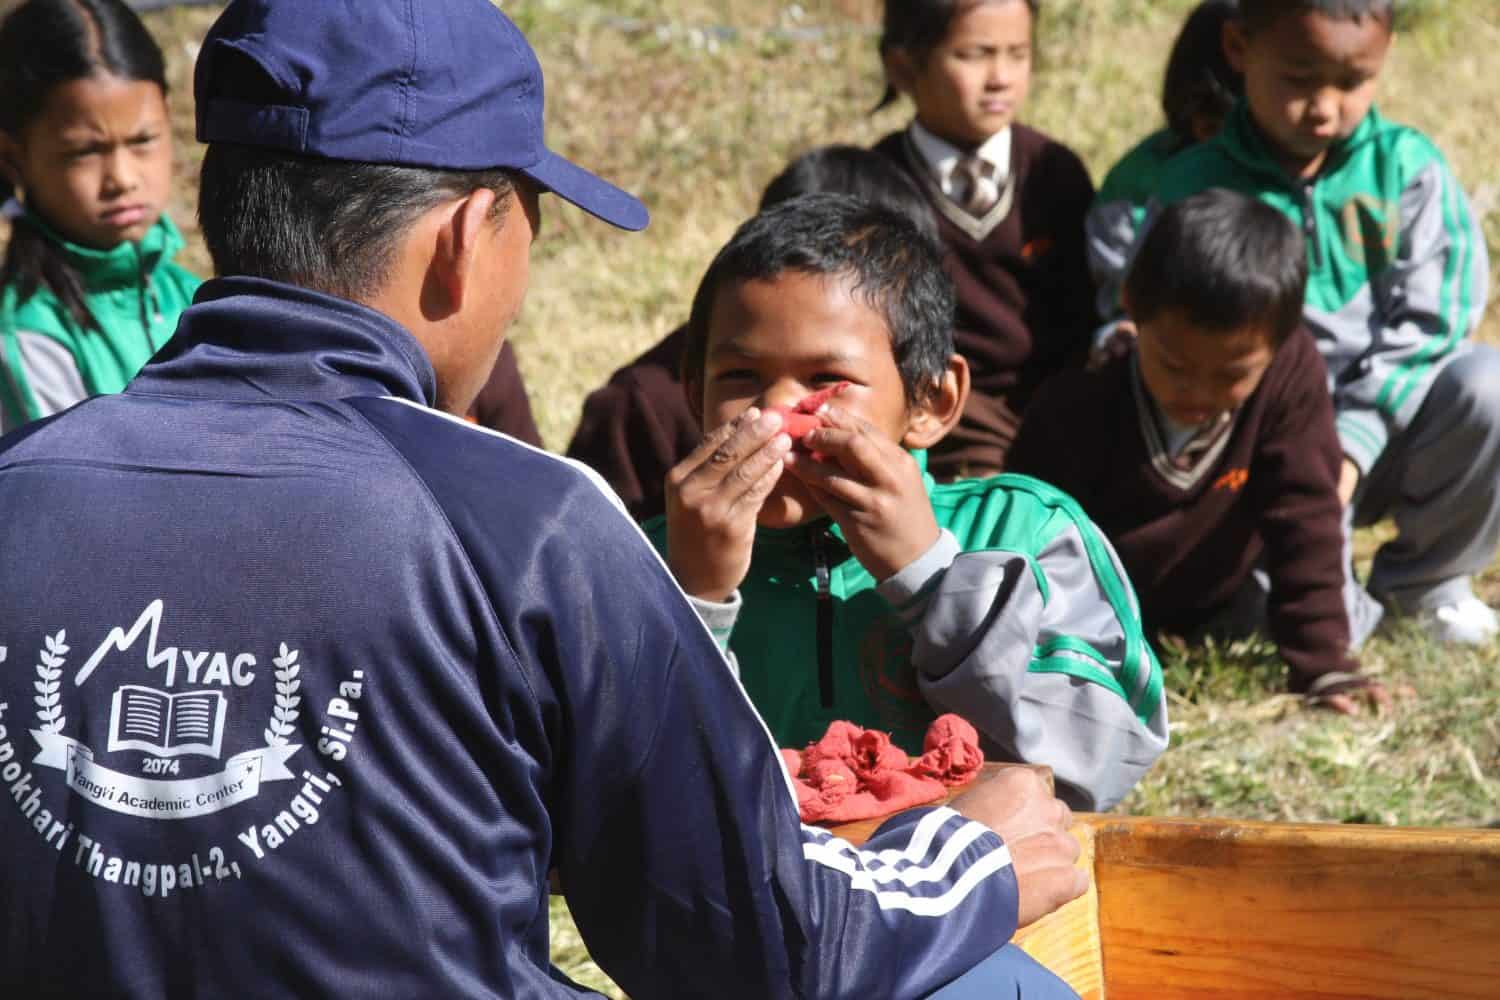 A young orphan boy in Nepal smells fresh flowers during Himalayan Life's Project Week